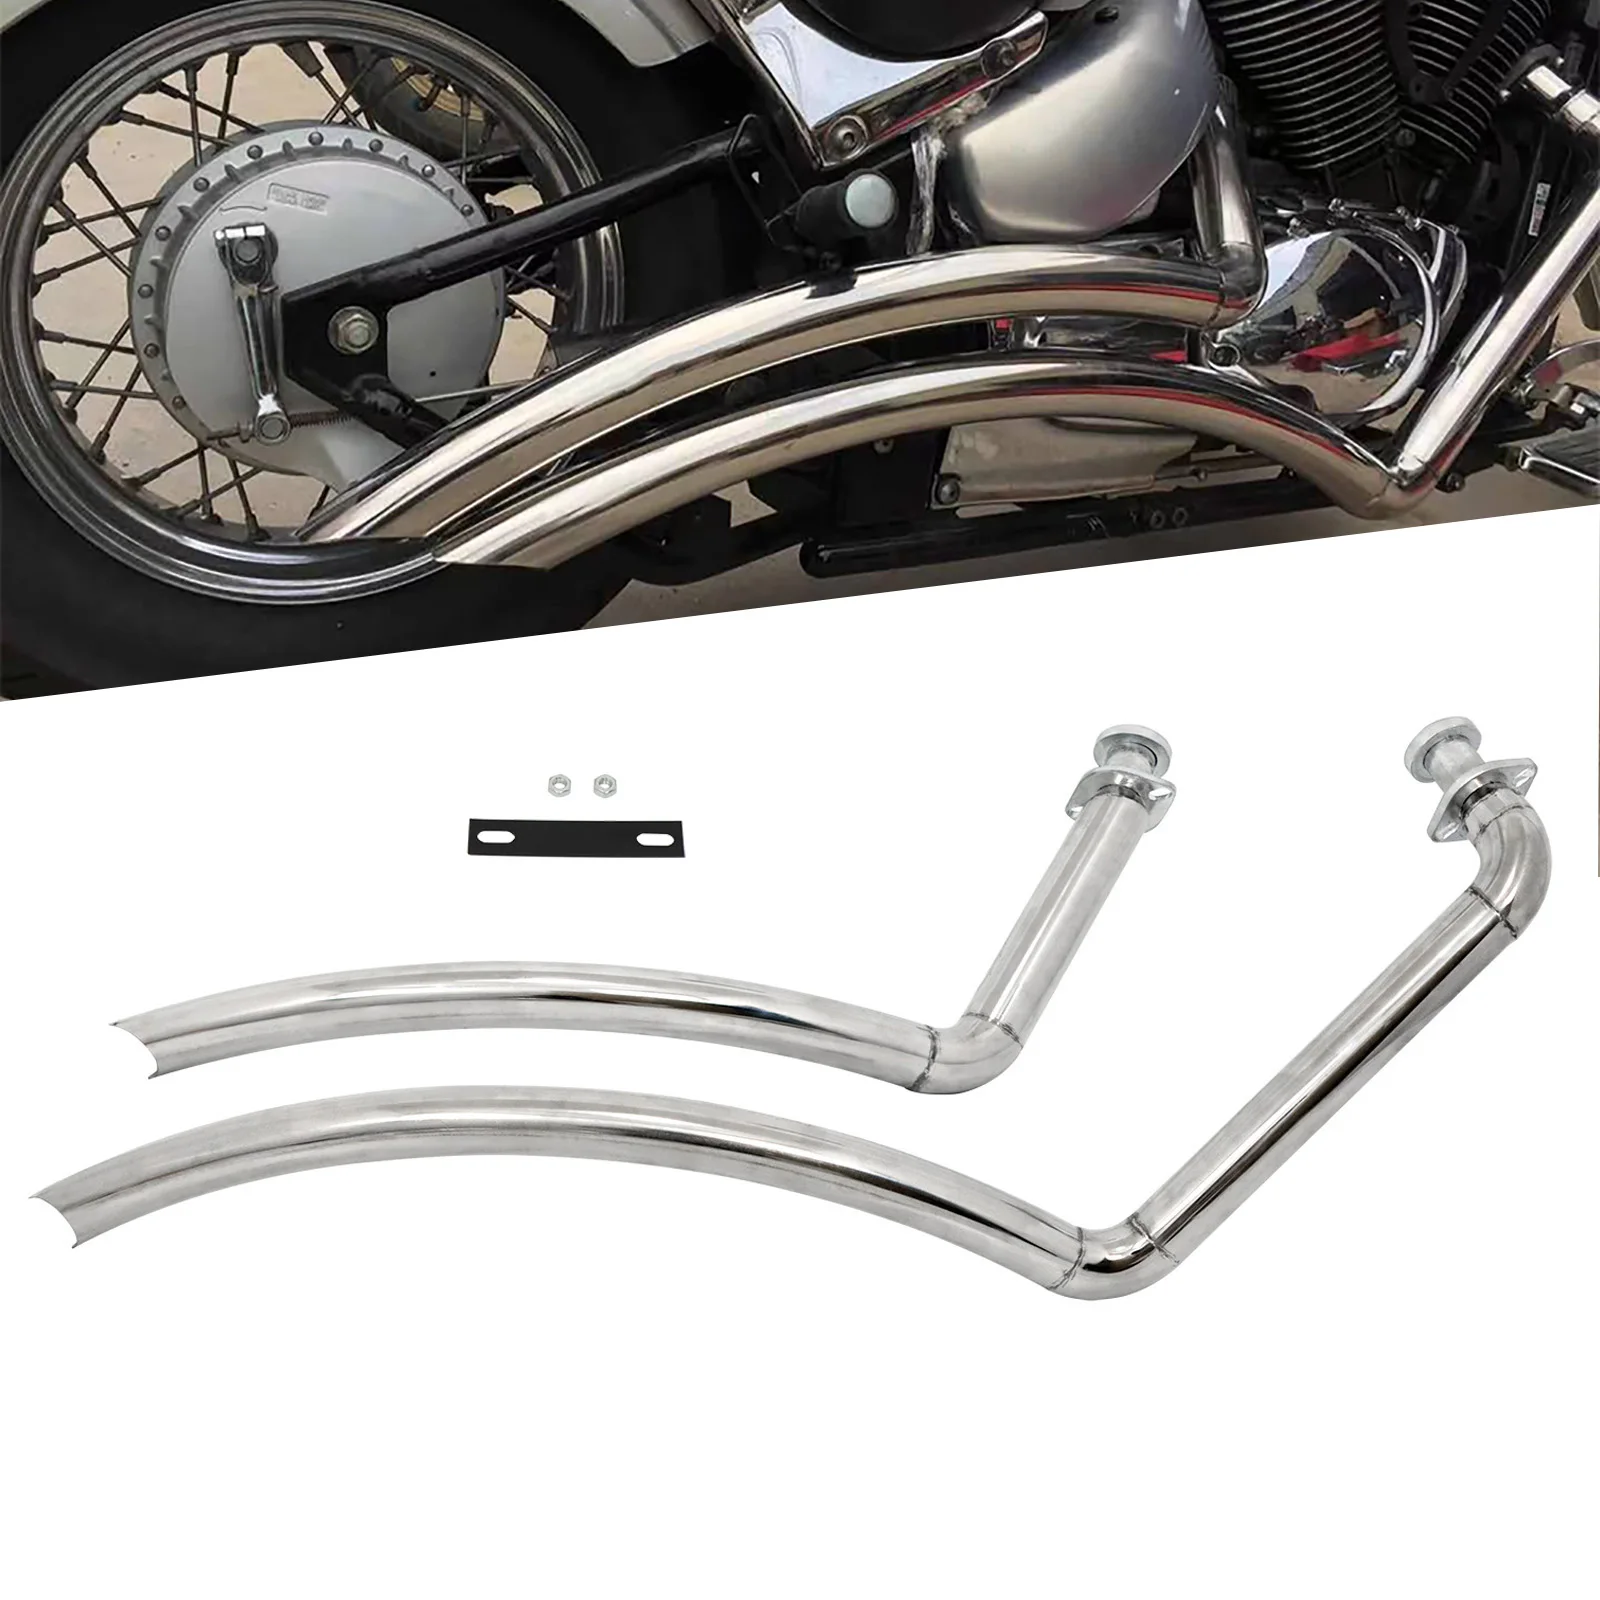 For Suzuki Boulevard C50 M1800R C50T M109R VZR1800 C90T S40 M50 M90 Motorcycle Exhaust Pipe Muffler Full Exhaust System Pipe Kit